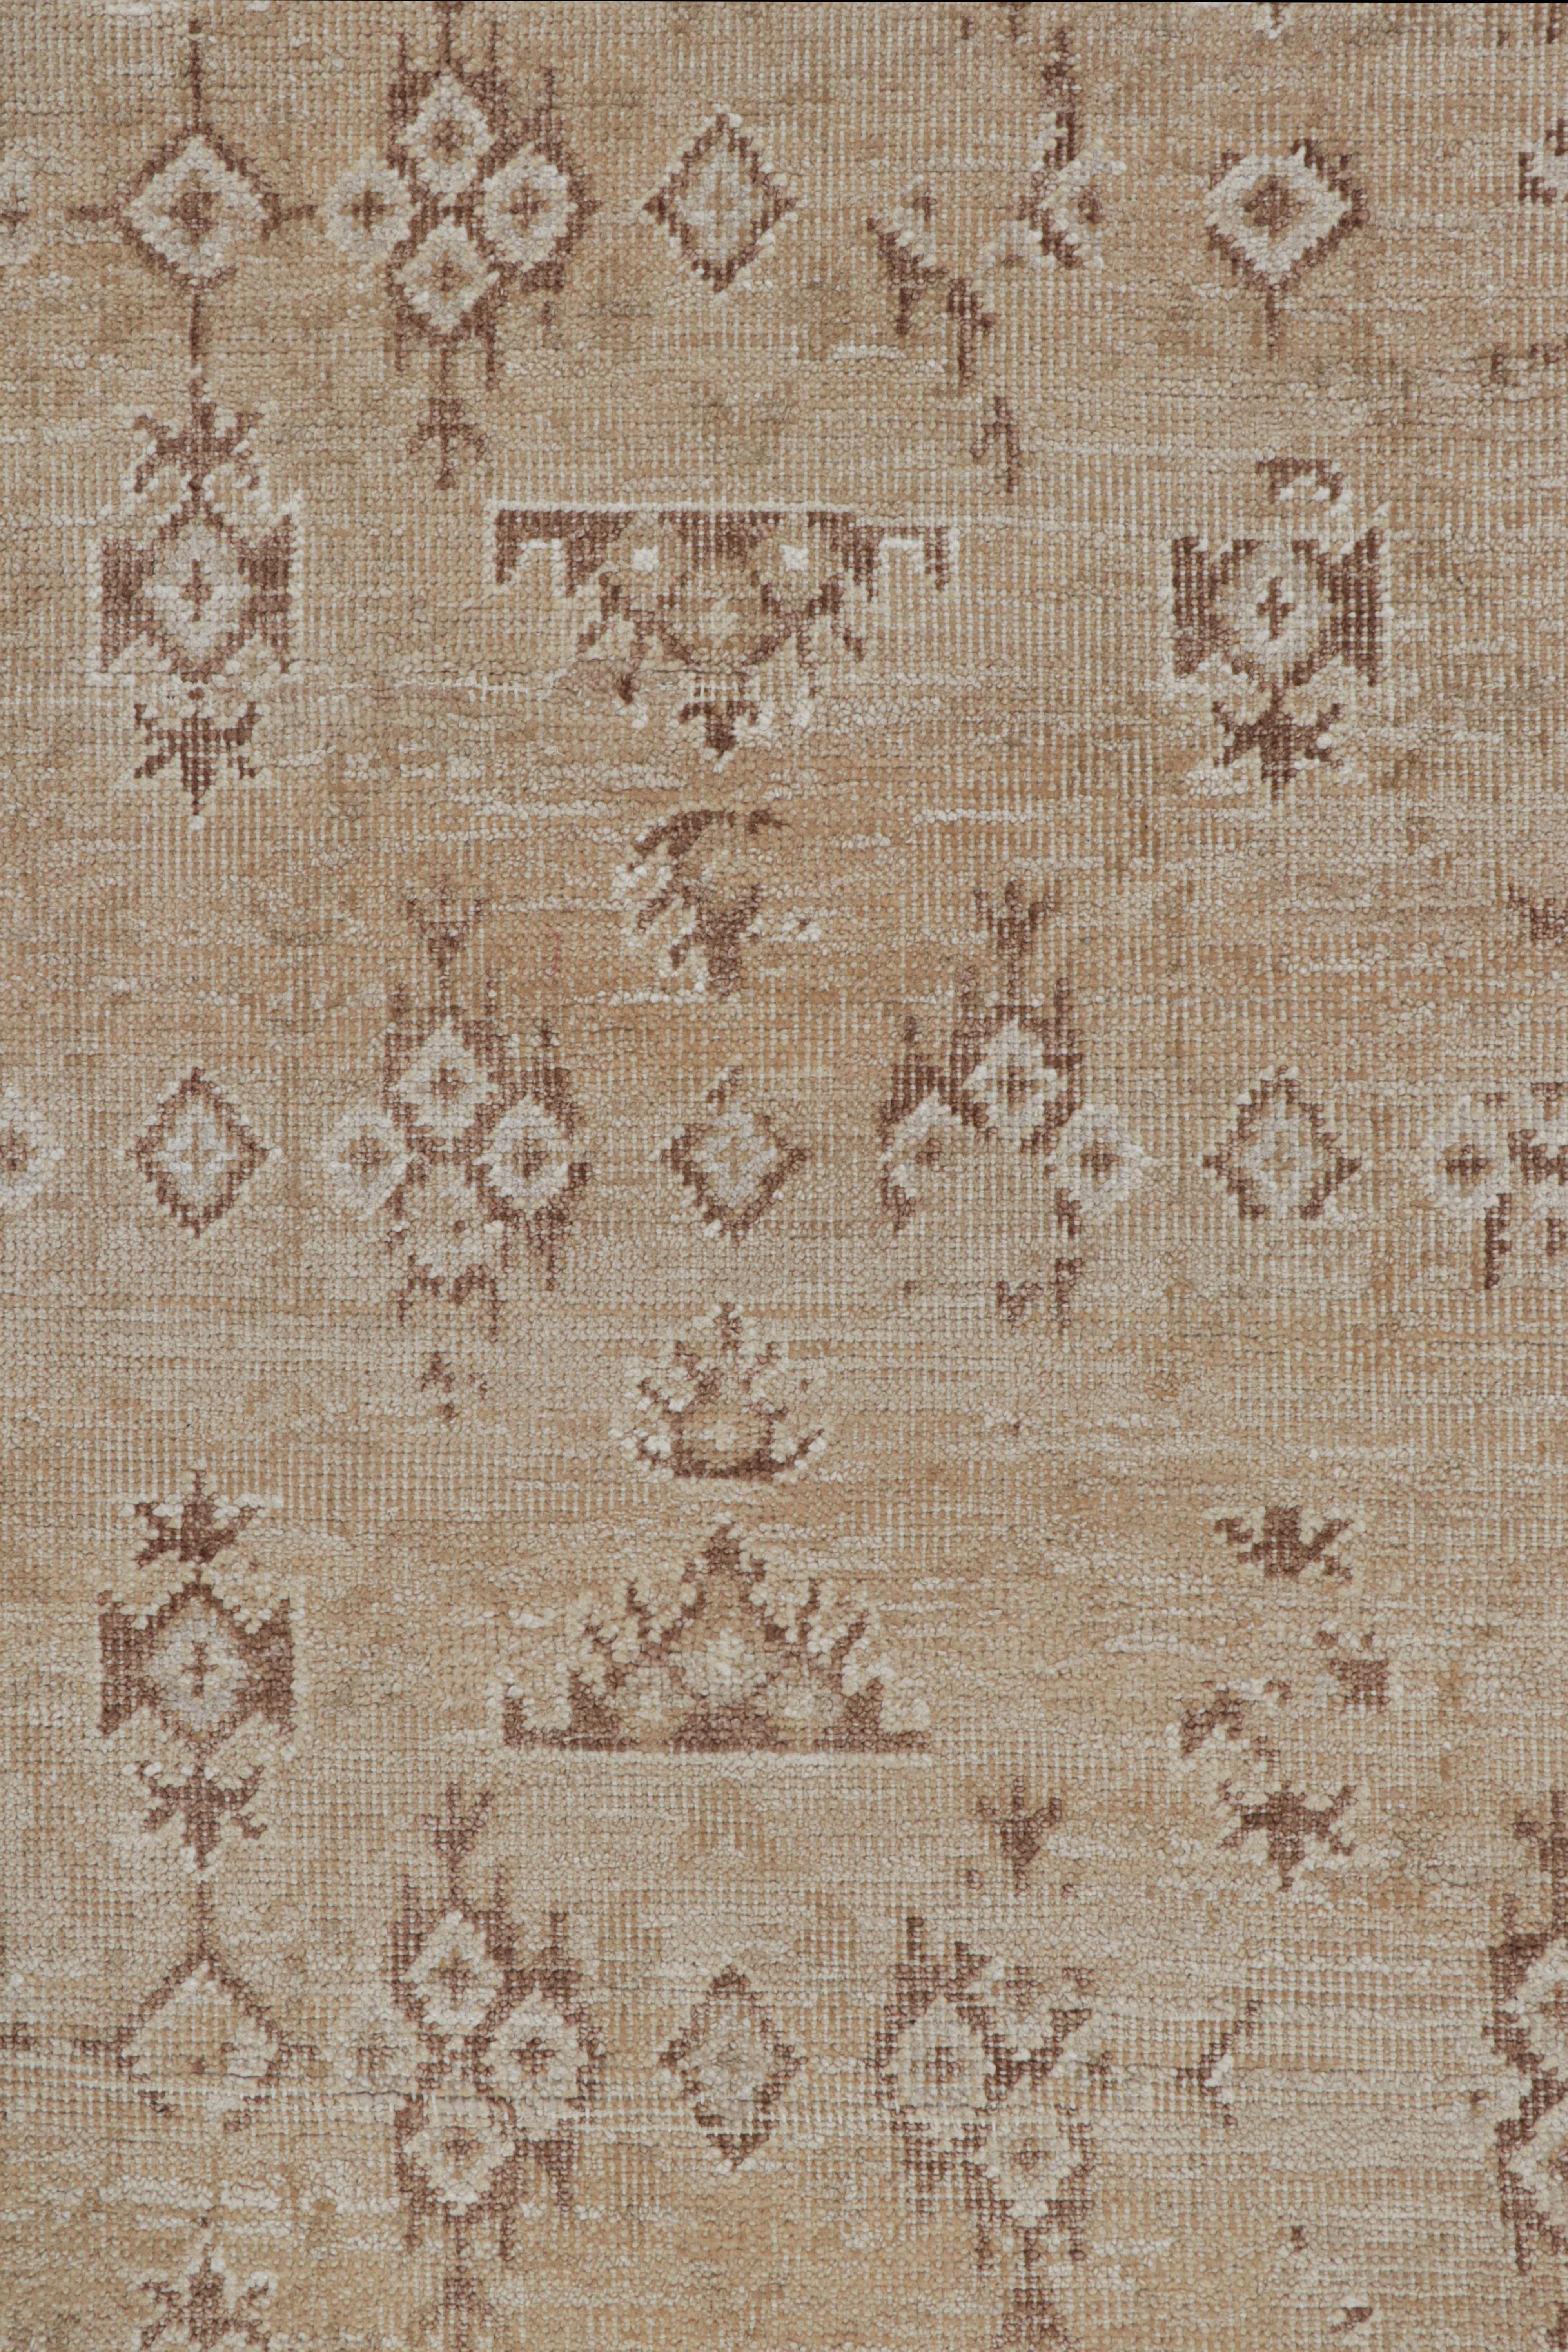 Contemporary Rug & Kilim’s Oushak Style Rug with Floral Patterns in Tones of Brown For Sale